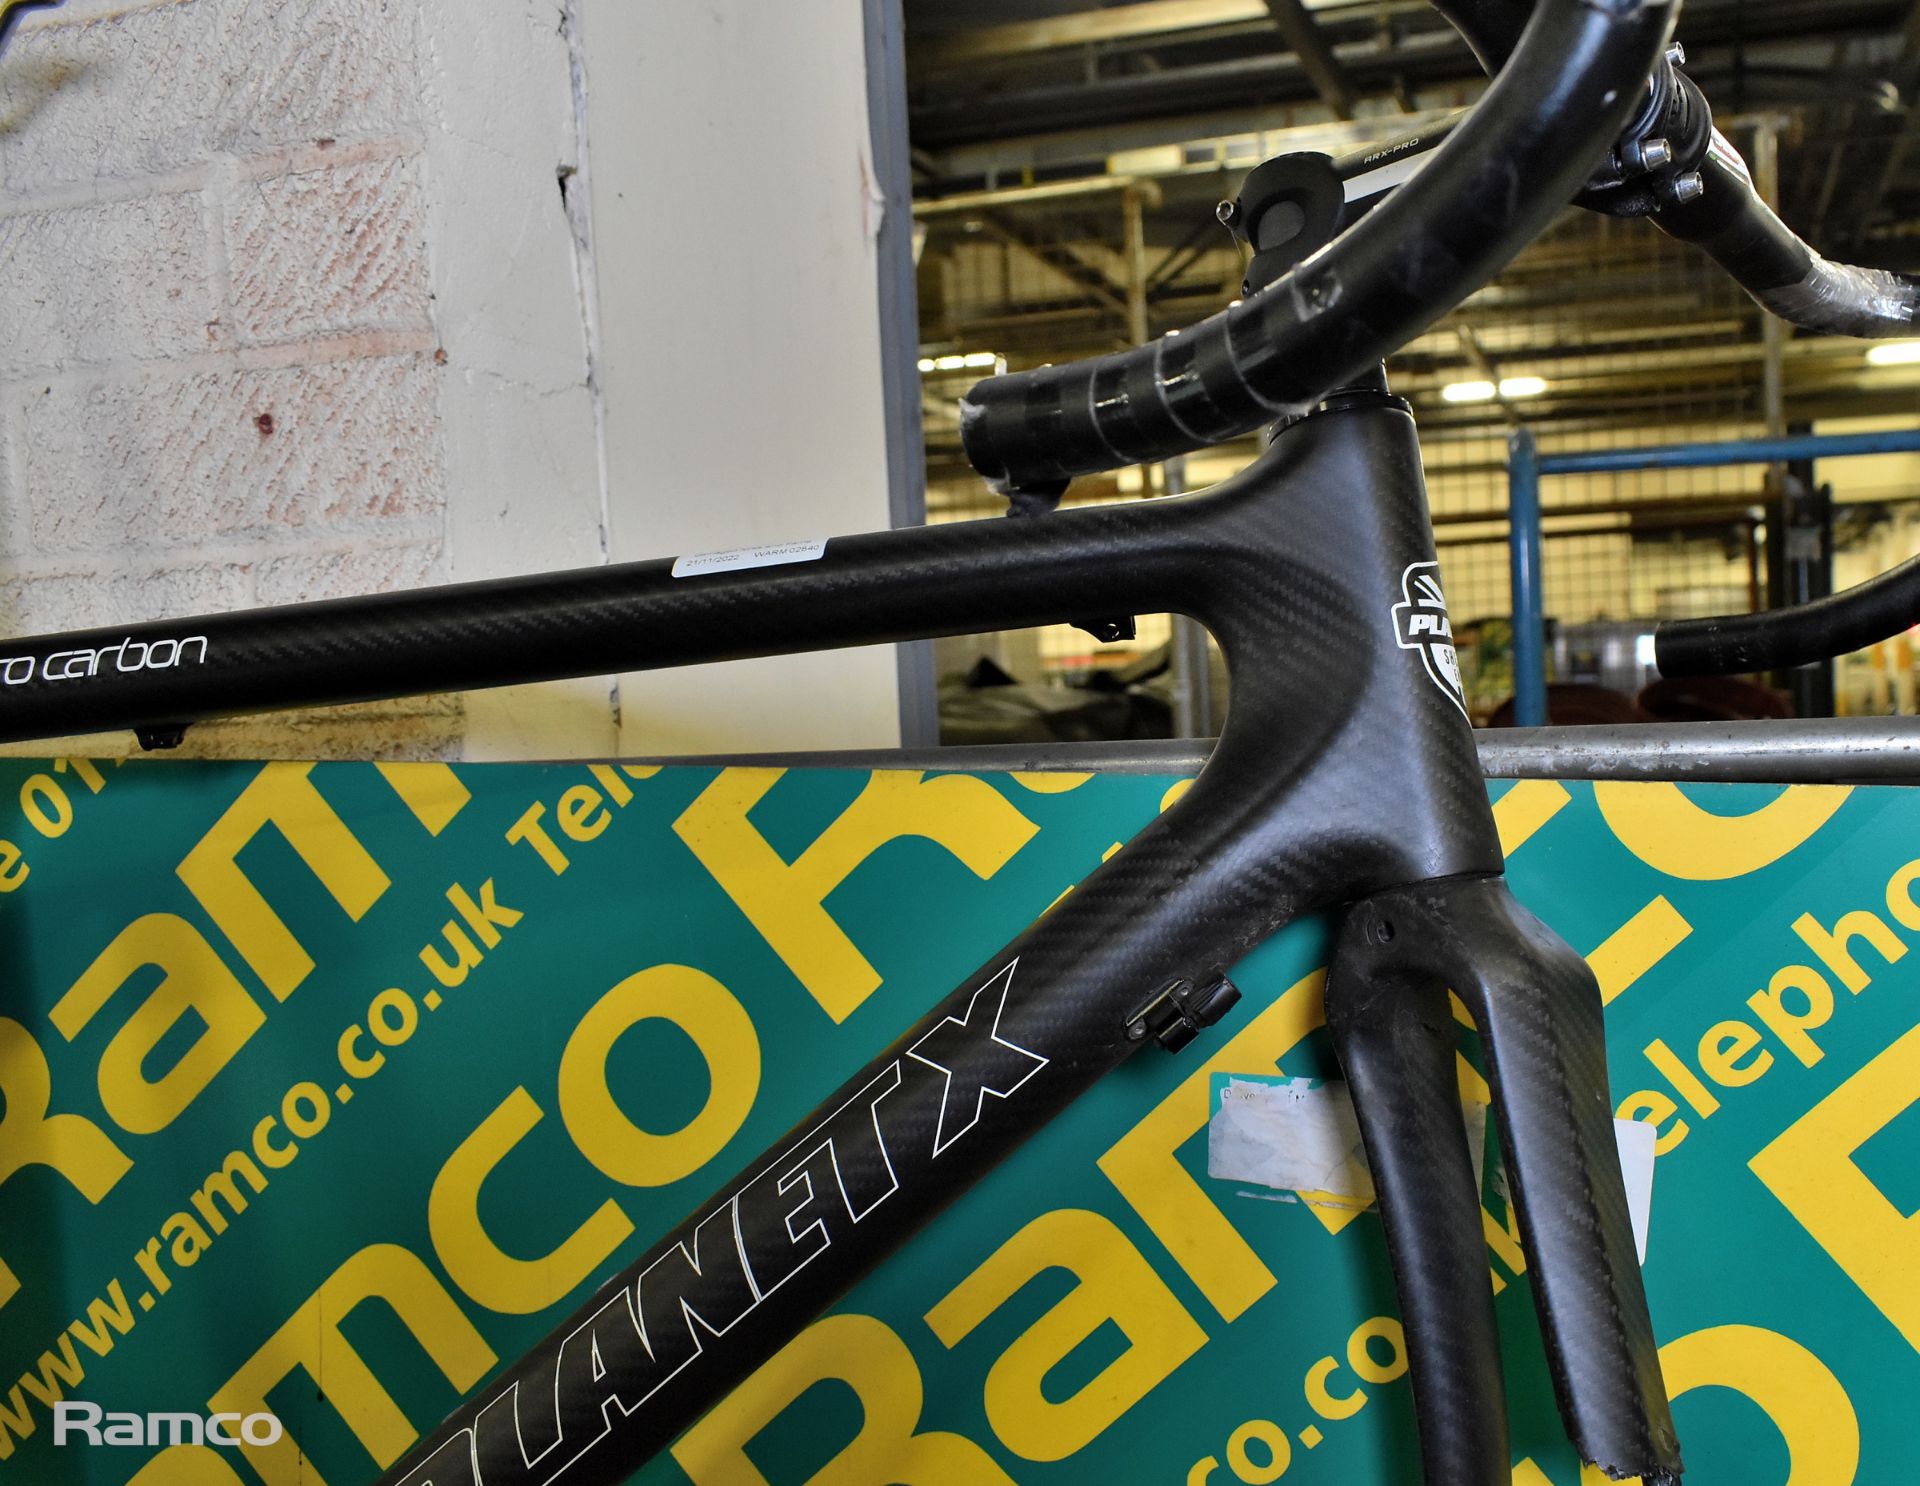 Planet X Pro Carbon road bike frame with handlebars, forks and seat post - damaged forks and frame - Image 4 of 7